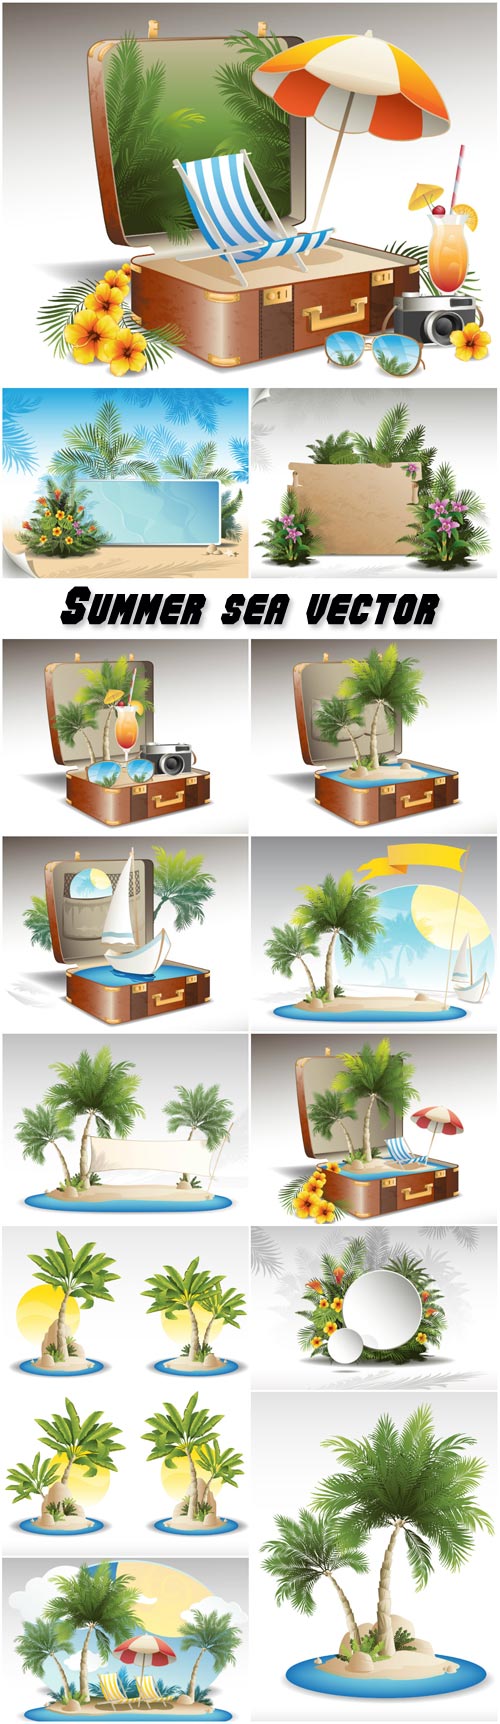 Summer sea vector with palm trees